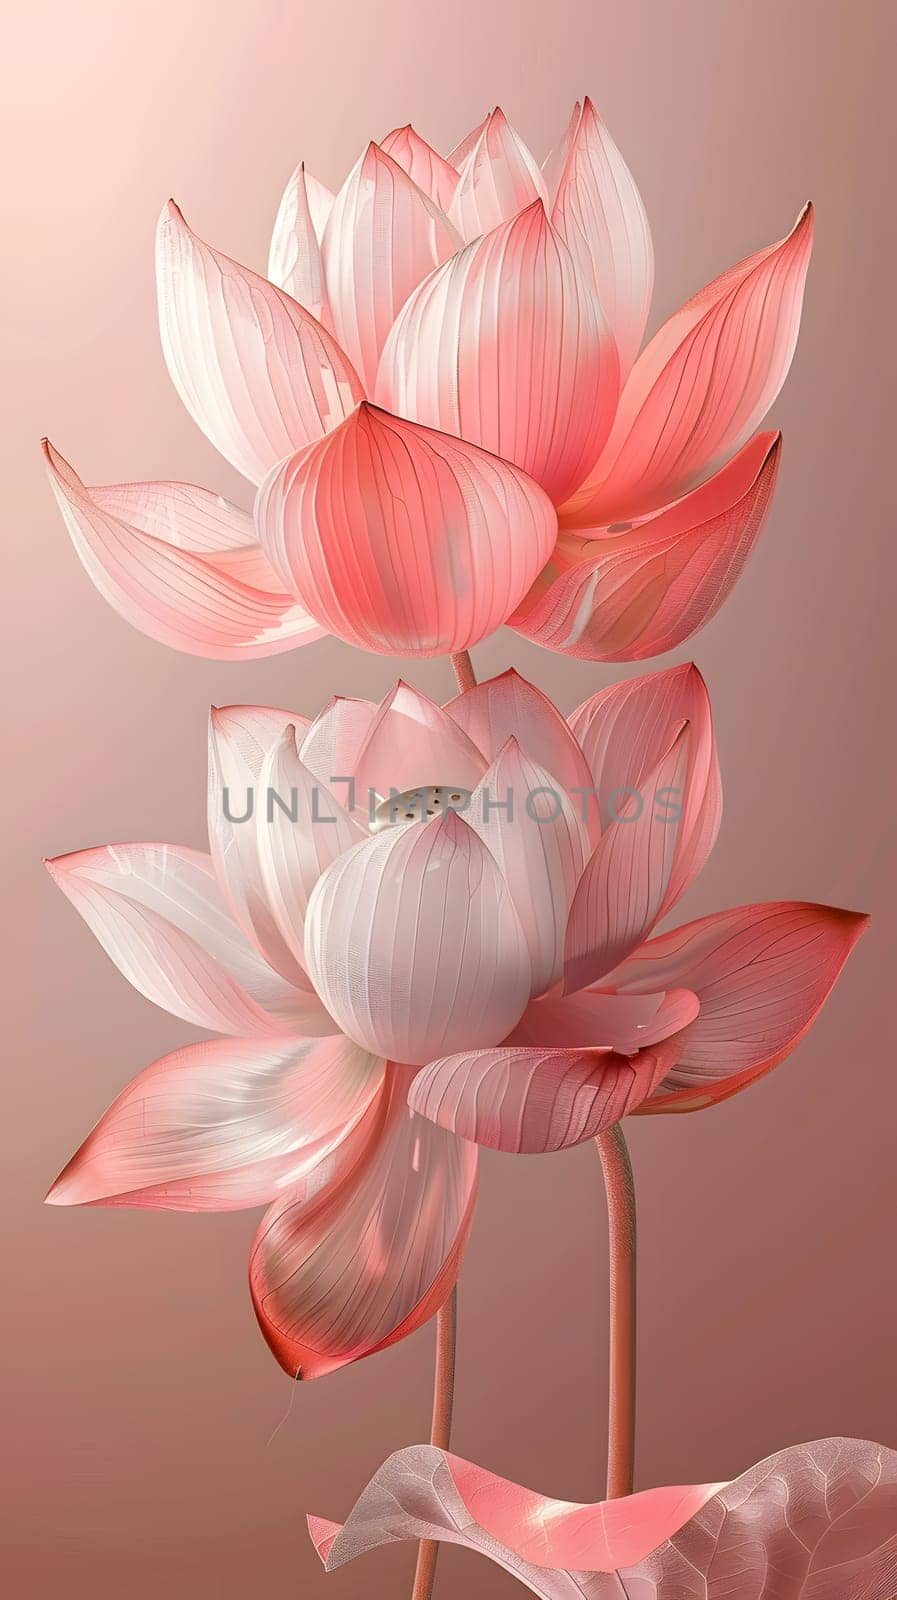 A closeup shot showcasing two pink lotus flowers with delicate petals on a matching pink background. The image captures the beauty and elegance of this terrestrial plant in the Zingiberales order